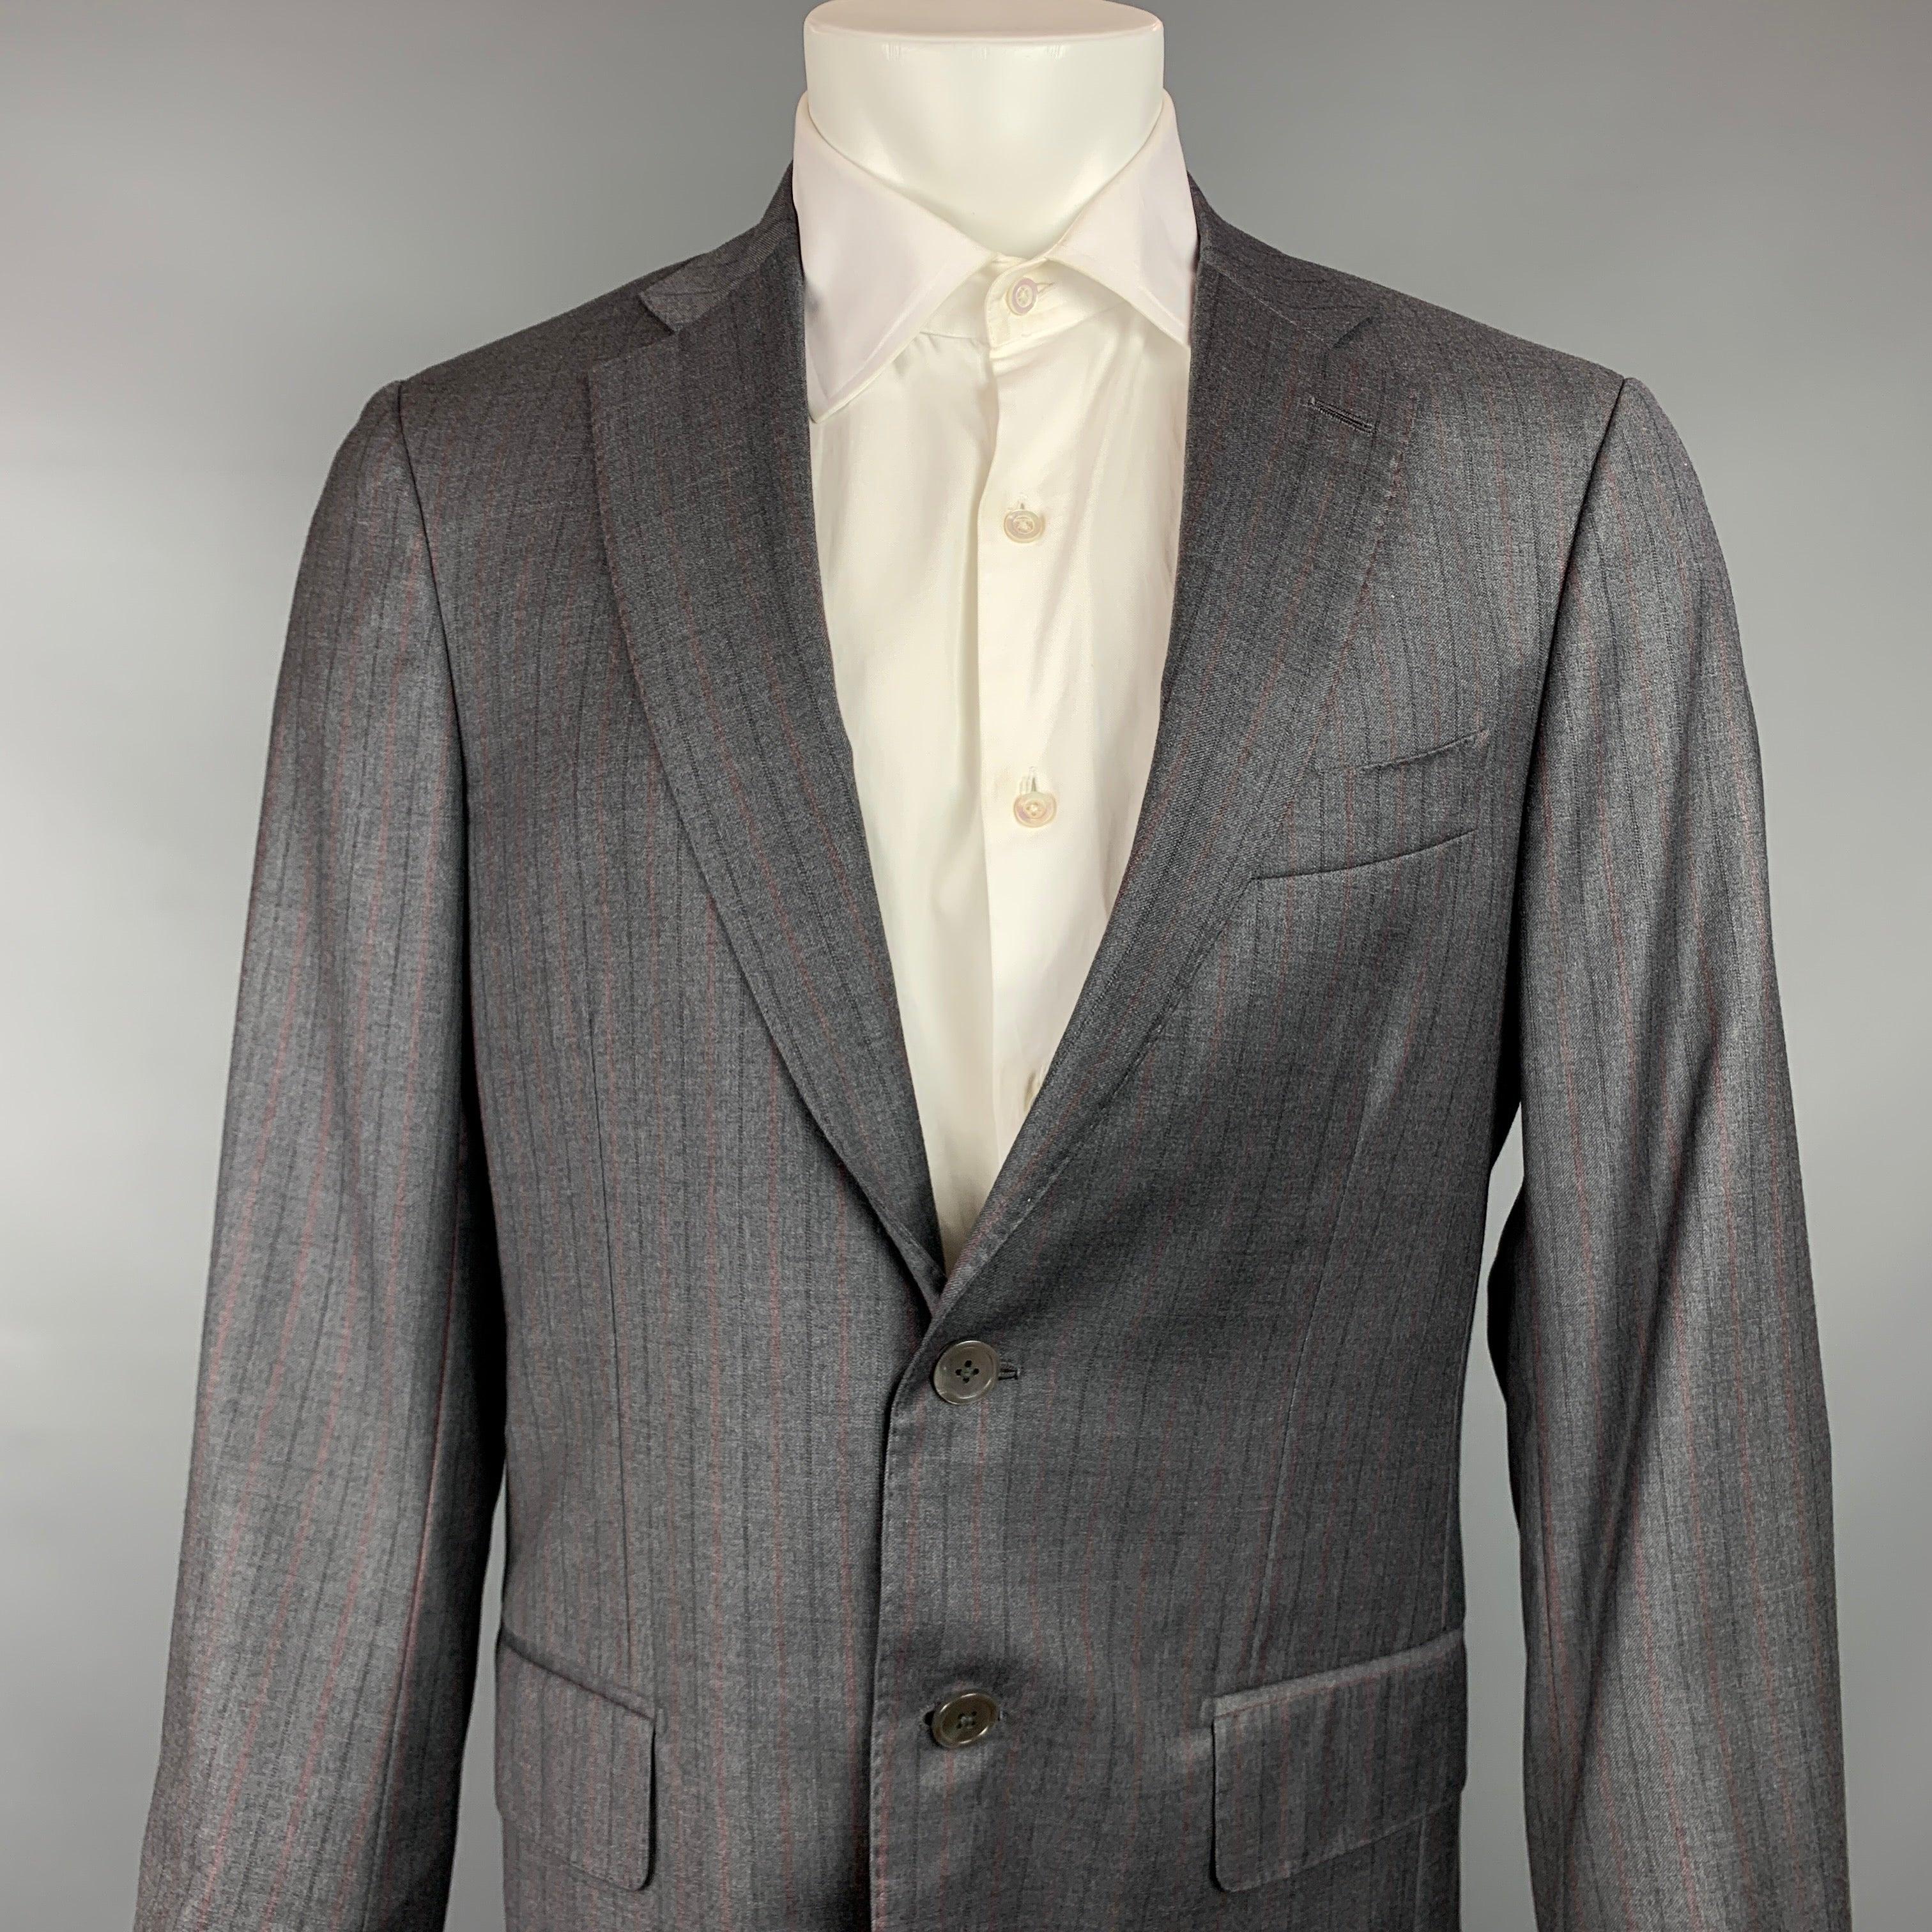 ISAIA
sport coat comes in a gray & charcoal stripe wool with a full liner featuring a notch lapel, flap pockets, and a double button closure. Made in Italy.Very Good Pre-Owned Condition. 

Marked:   50 

Measurements: 
 
Shoulder: 17.5 inches 